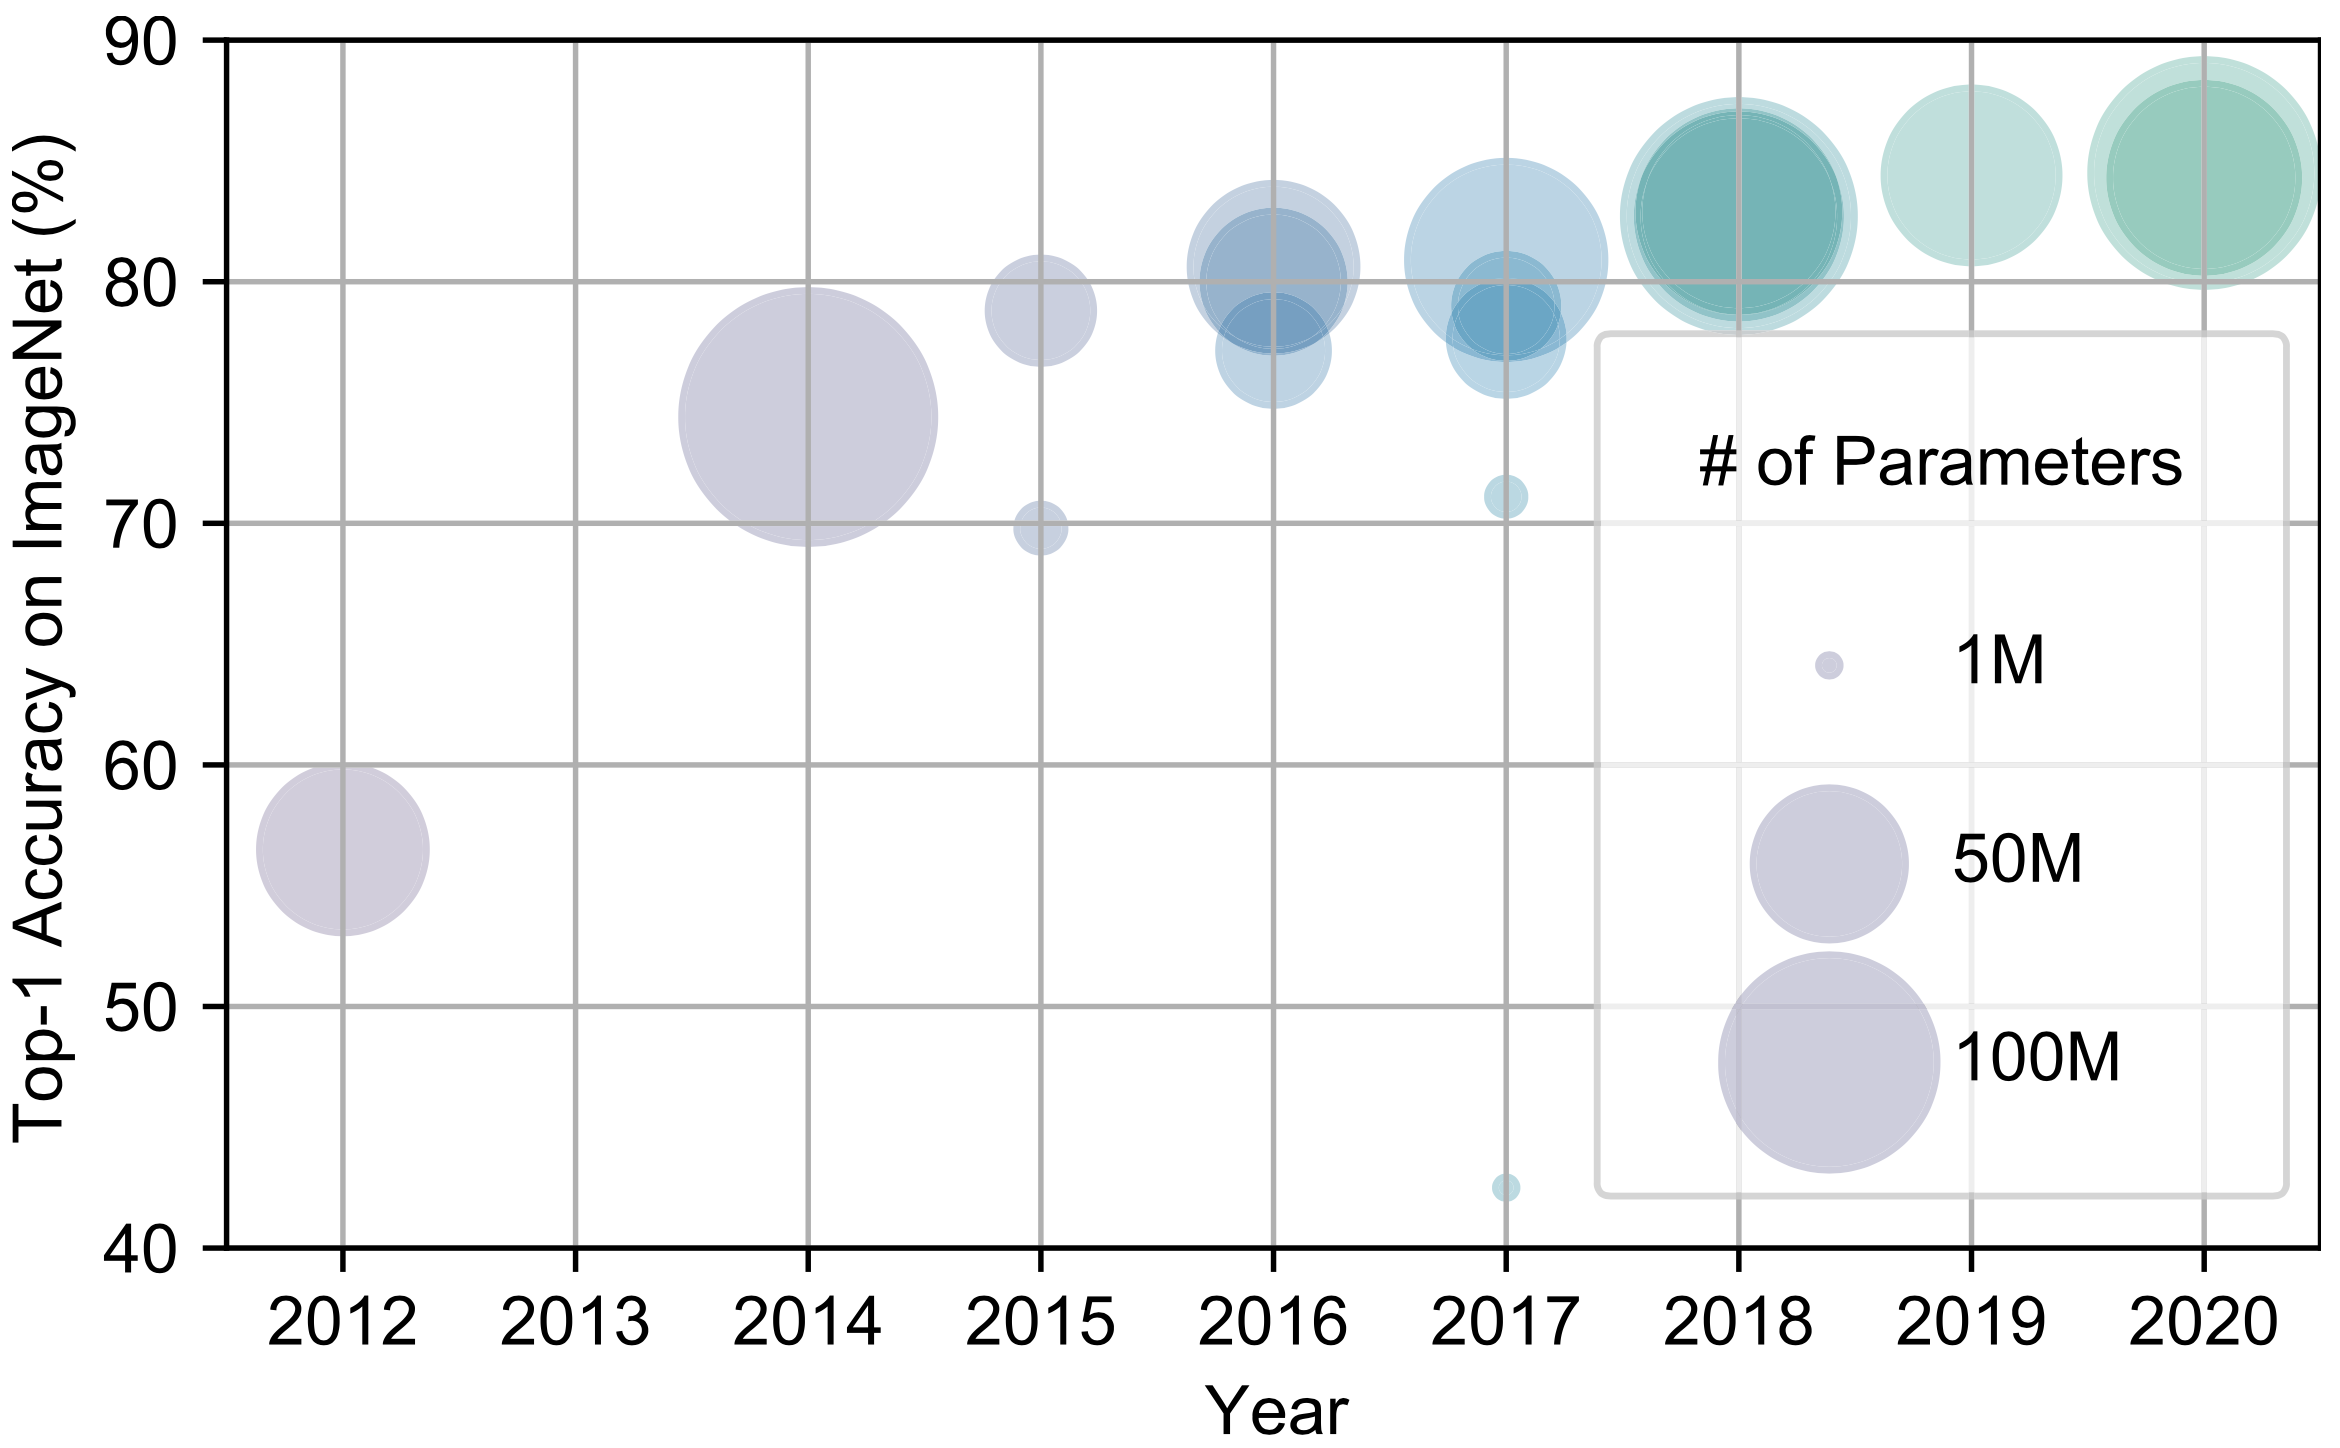 Fig. 4. Timeline of state-of-the-art NN models with the number of parameters (from ImageNet) [4]